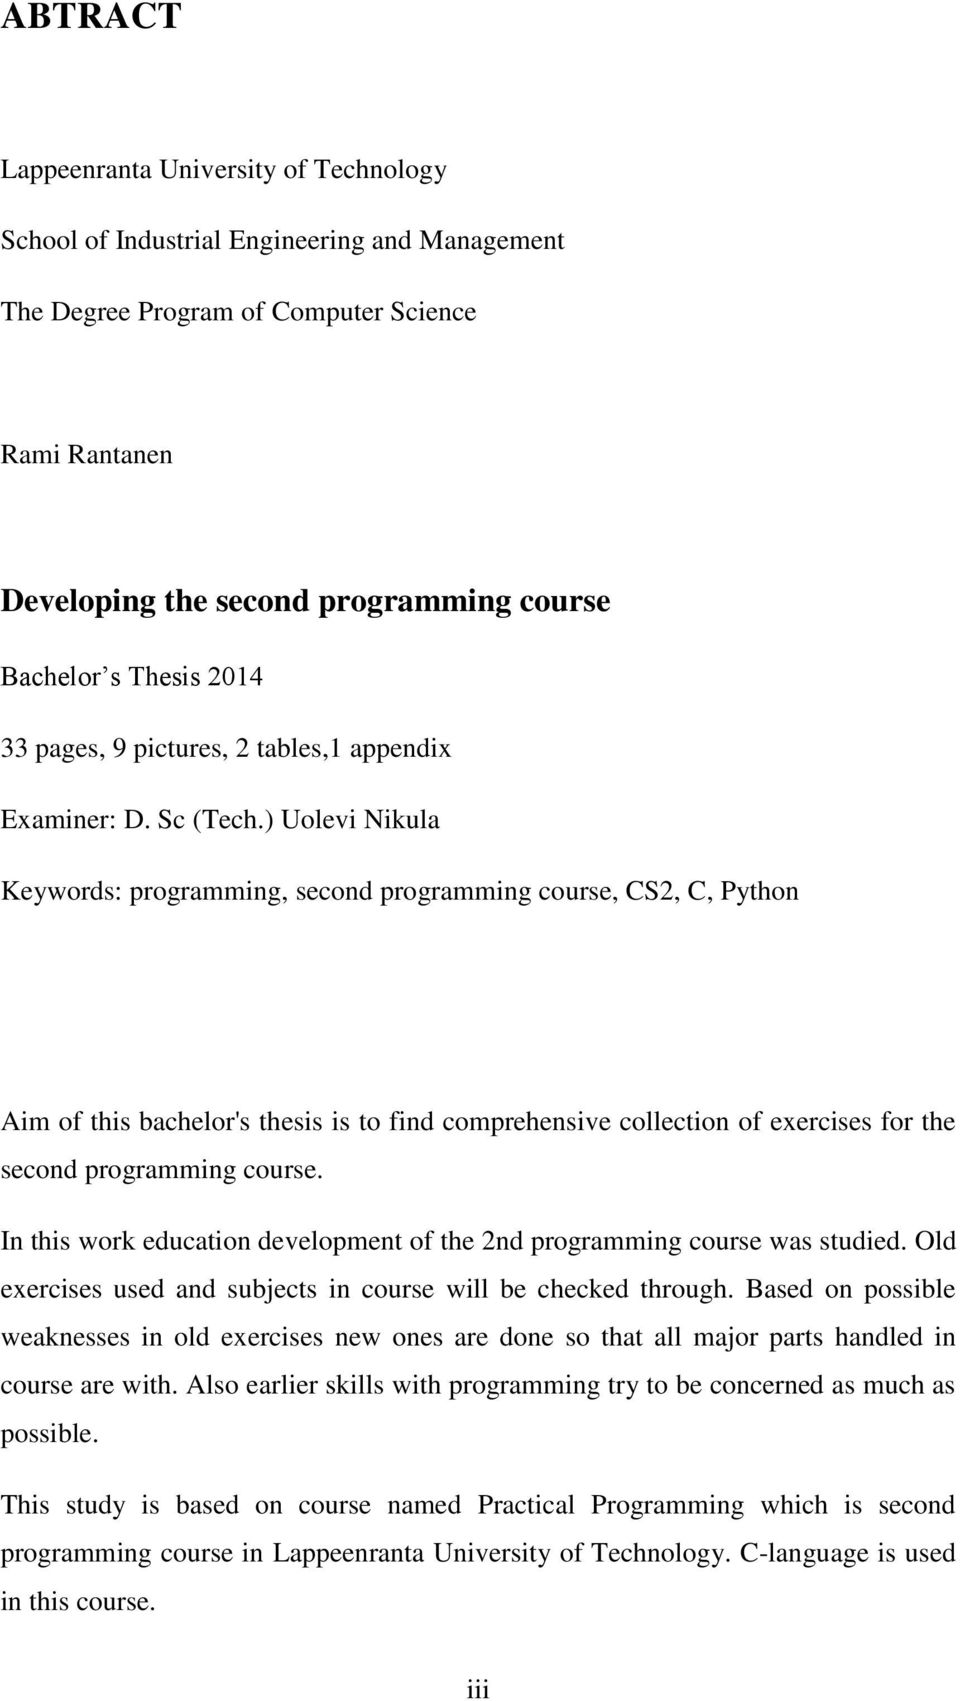 ) Uolevi Nikula Keywords: programming, second programming course, CS2, C, Python Aim of this bachelor's thesis is to find comprehensive collection of exercises for the second programming course.